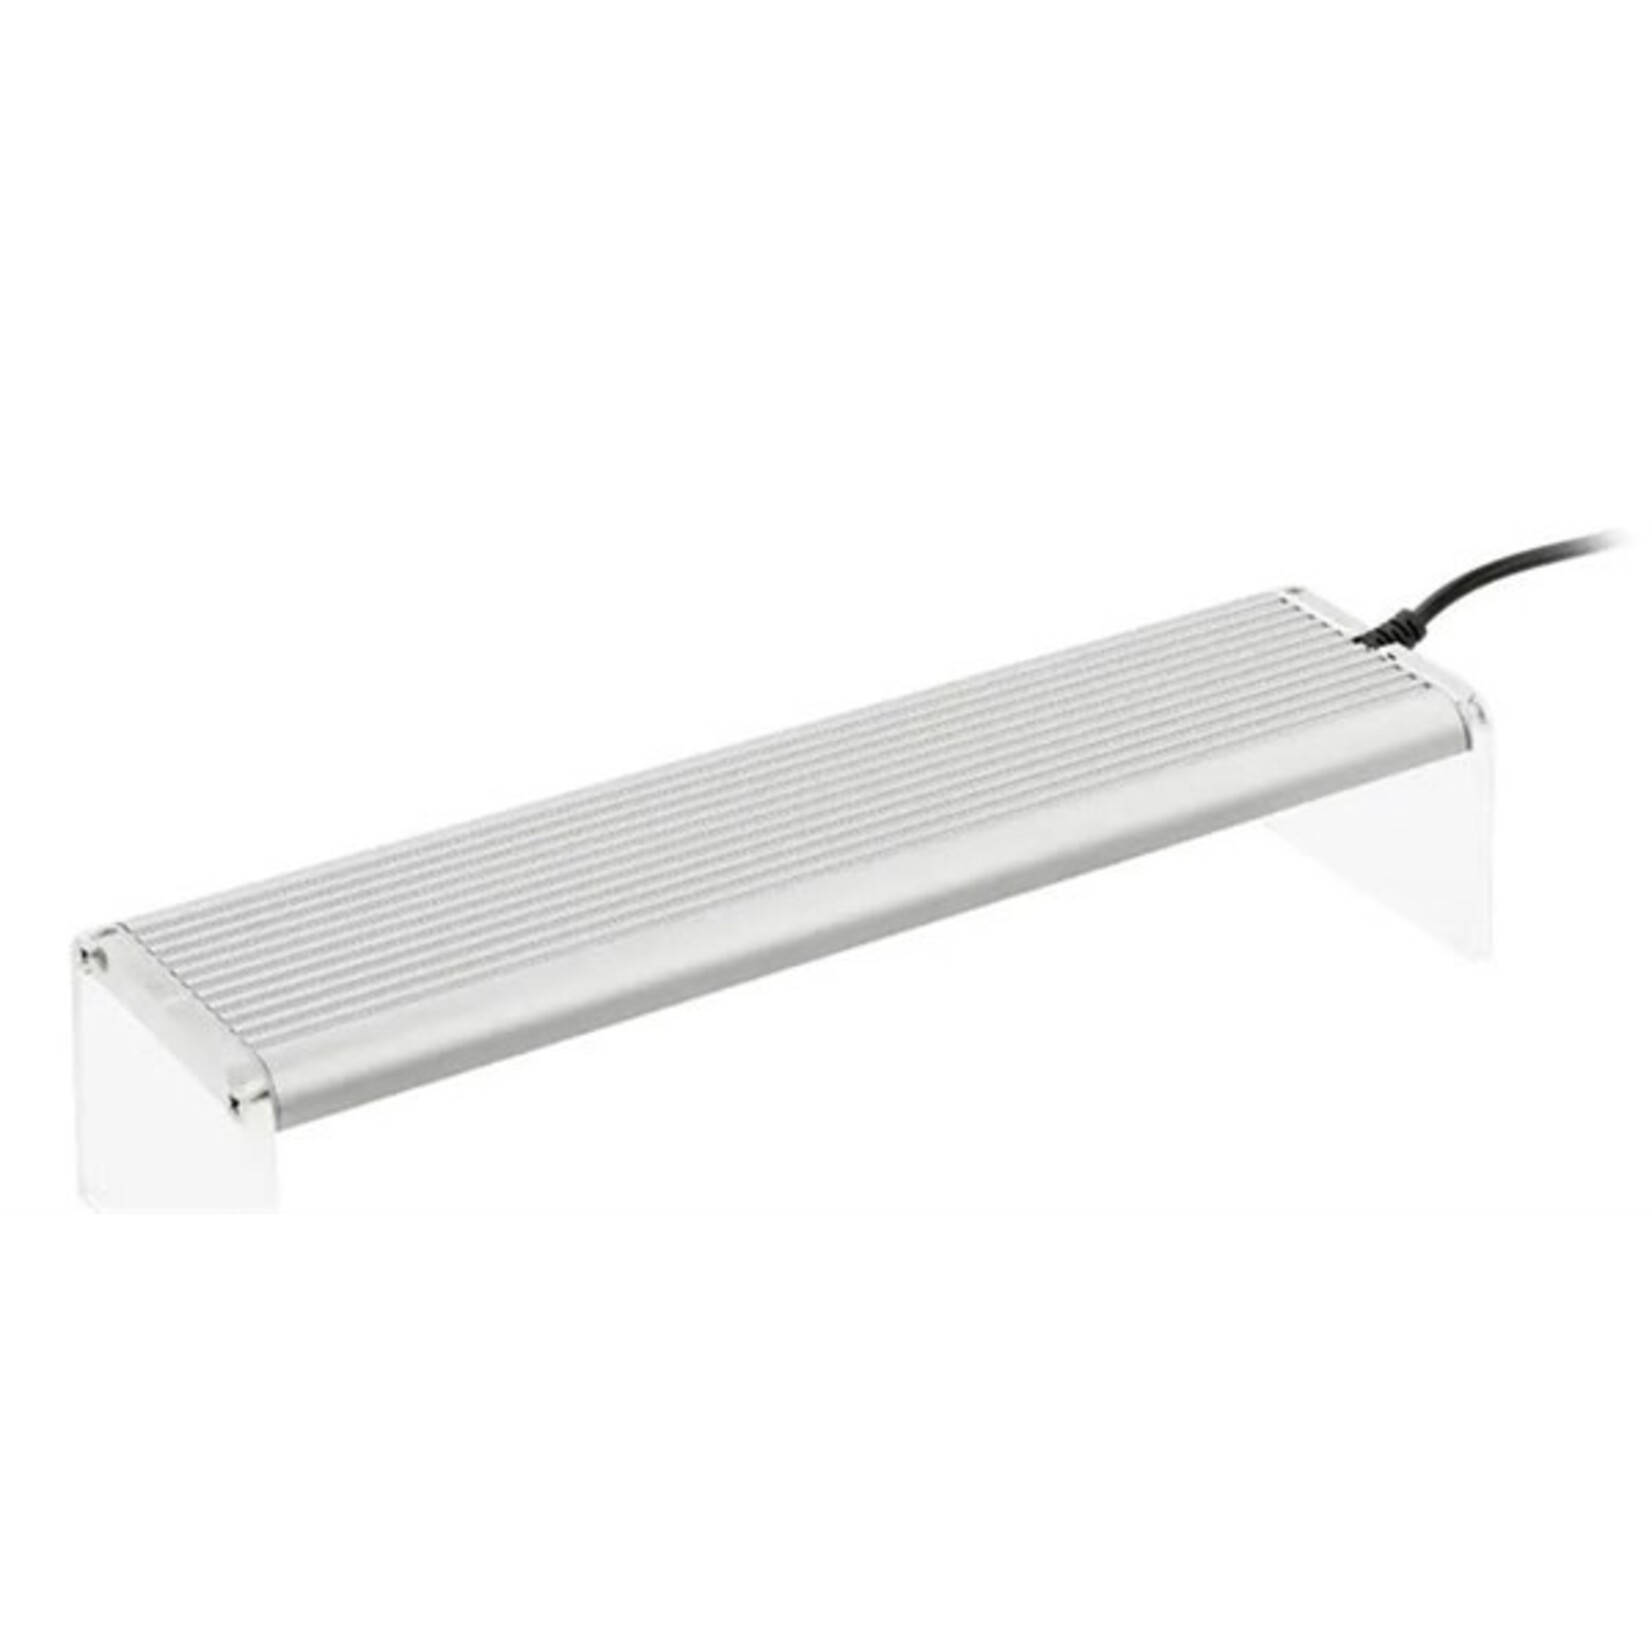 Chihiros A LED A201 20 cm 12w  - incl. Duitse trafo